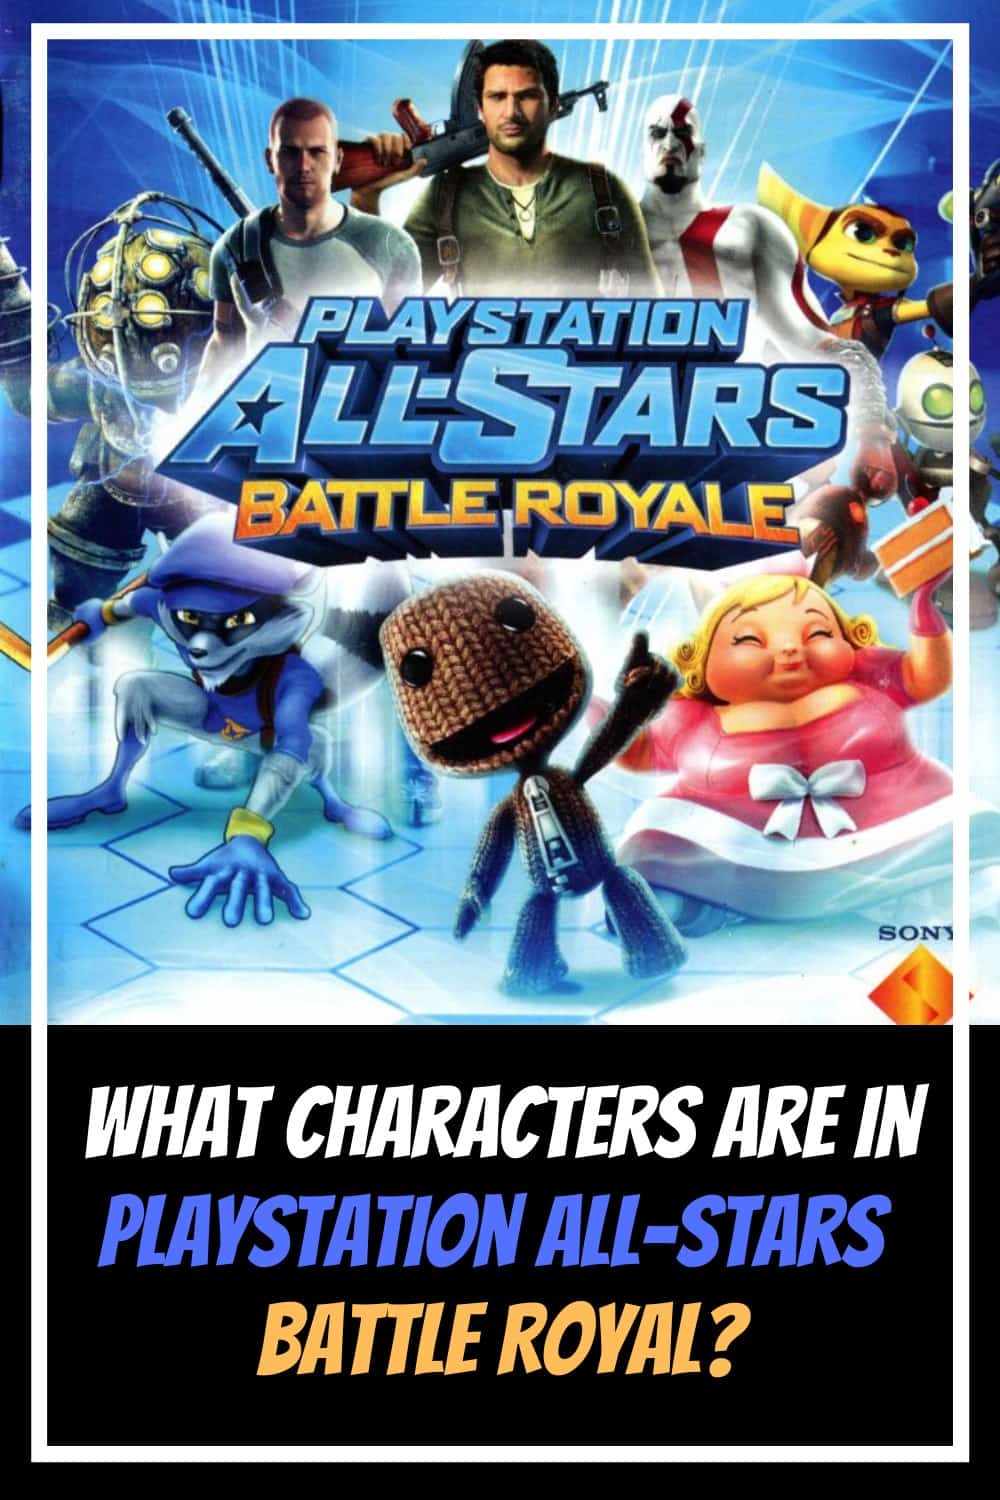 Every chararcter in Playstation All Stars Battle Royal